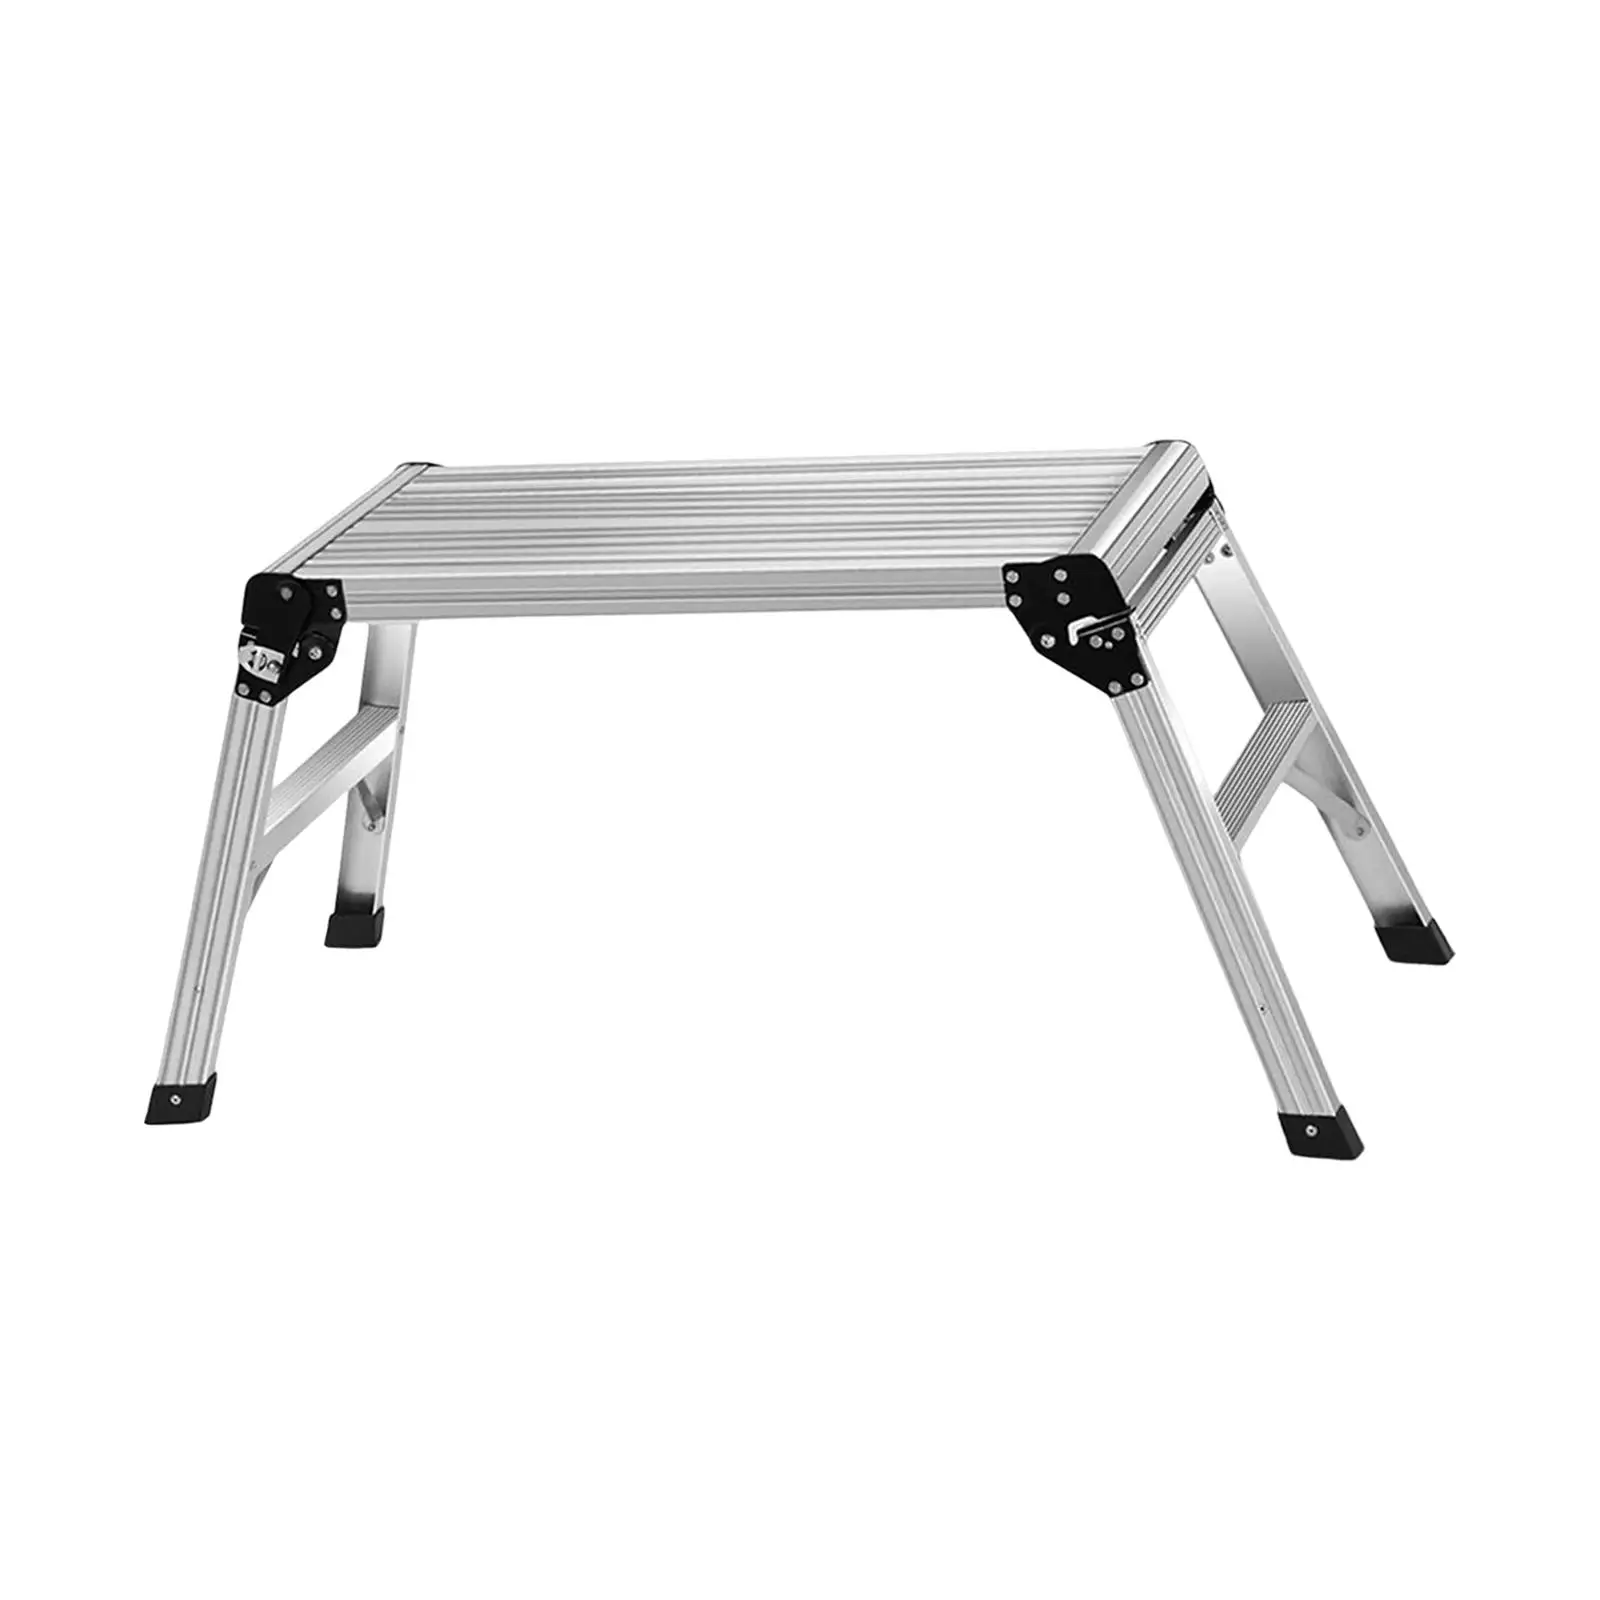 Folding Work Platform Footstool Car Wash Table Climbing Stool for Plasterers Repairing Cleaning Windows Home Decorating Office